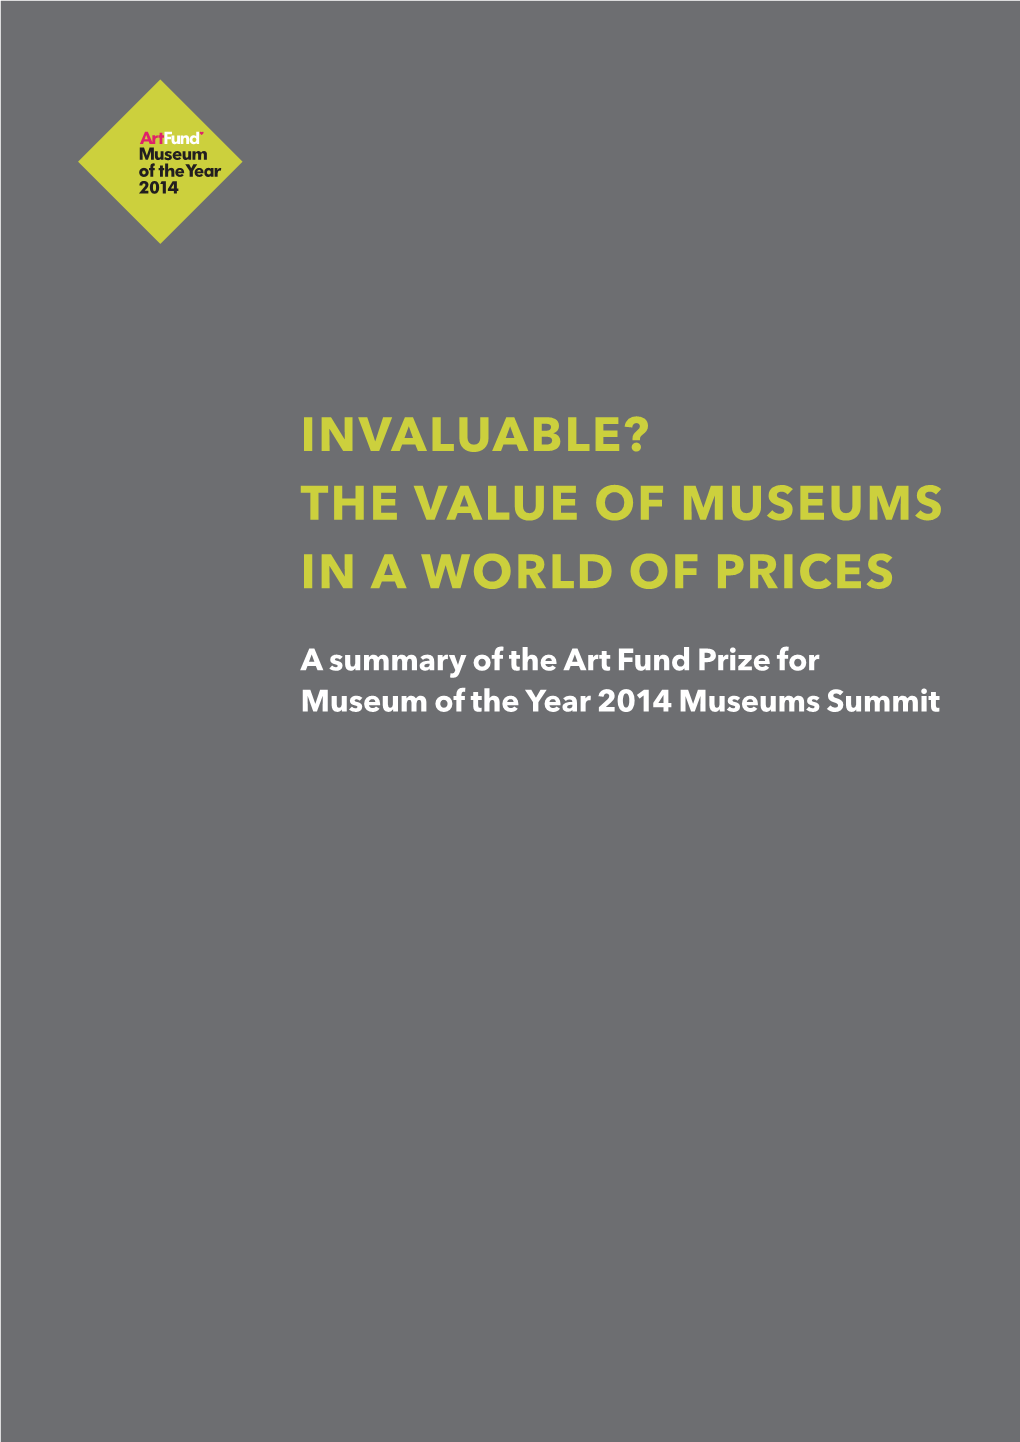 Invaluable? the Value of Museums in a World of Prices